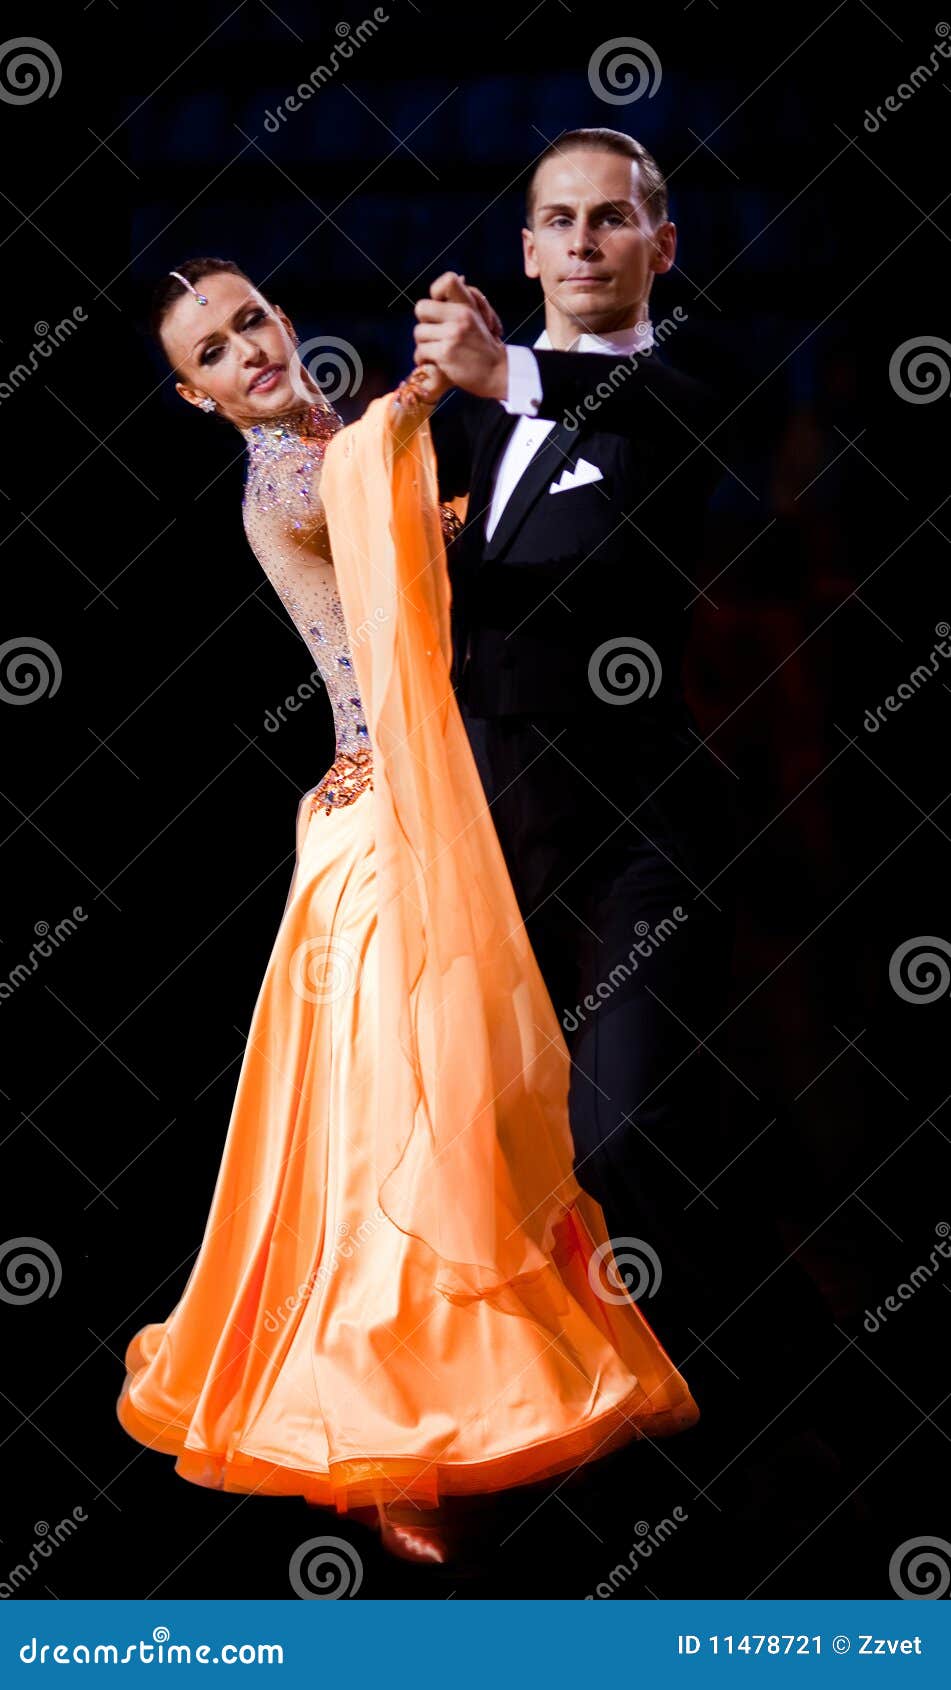 Young Couple Dancing Pose Isolated On Stock Photo 103536620 | Shutterstock